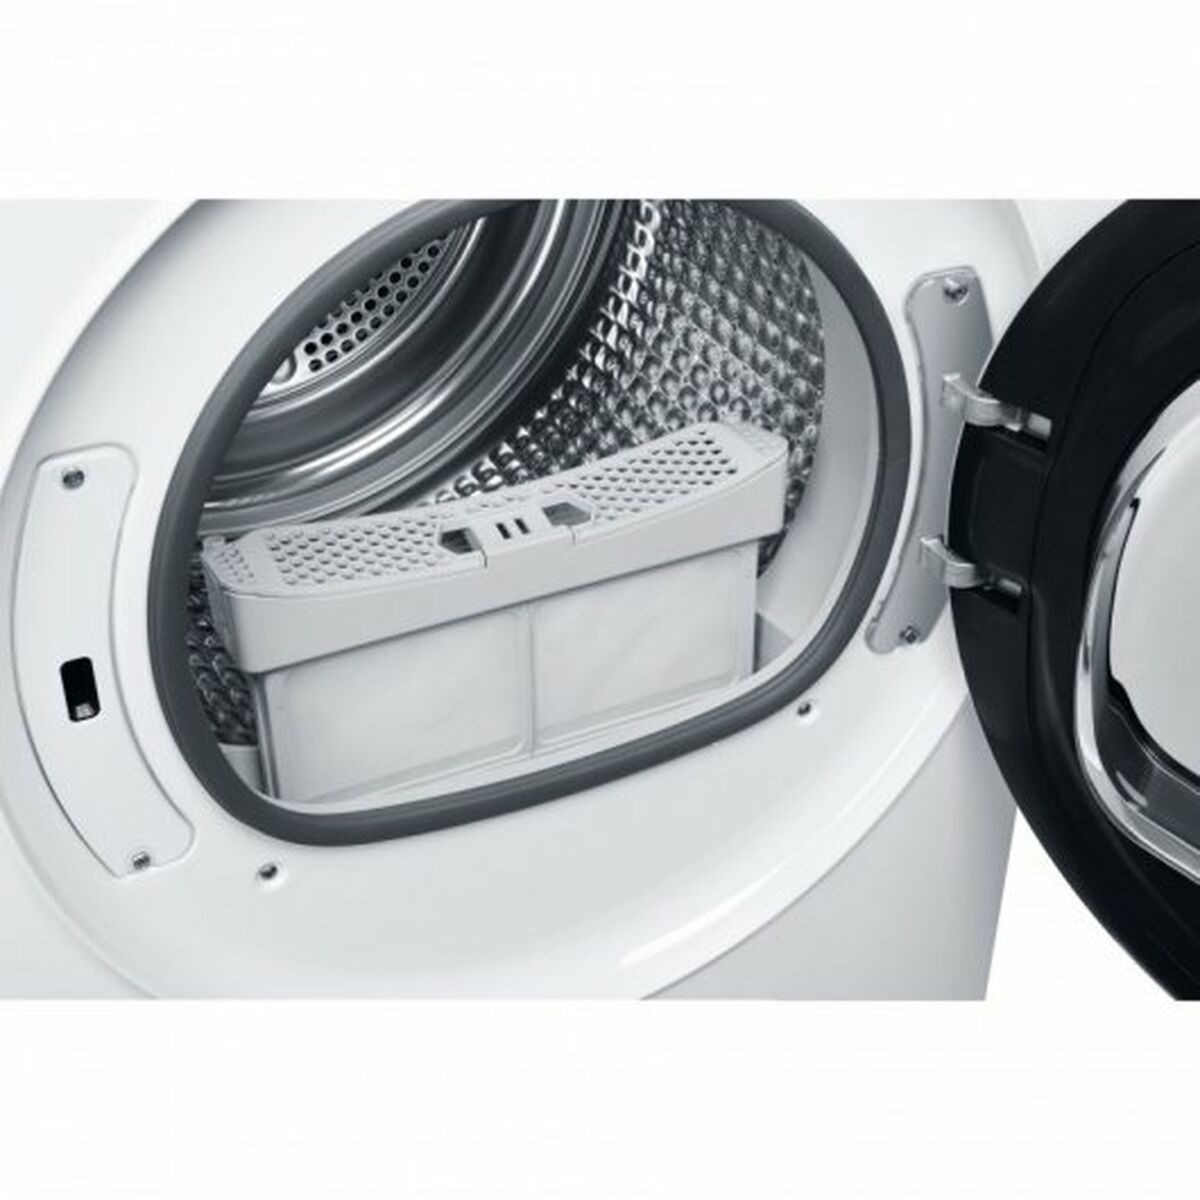 Condensdroger Haier HD90-A3979-S 9 kg Wit